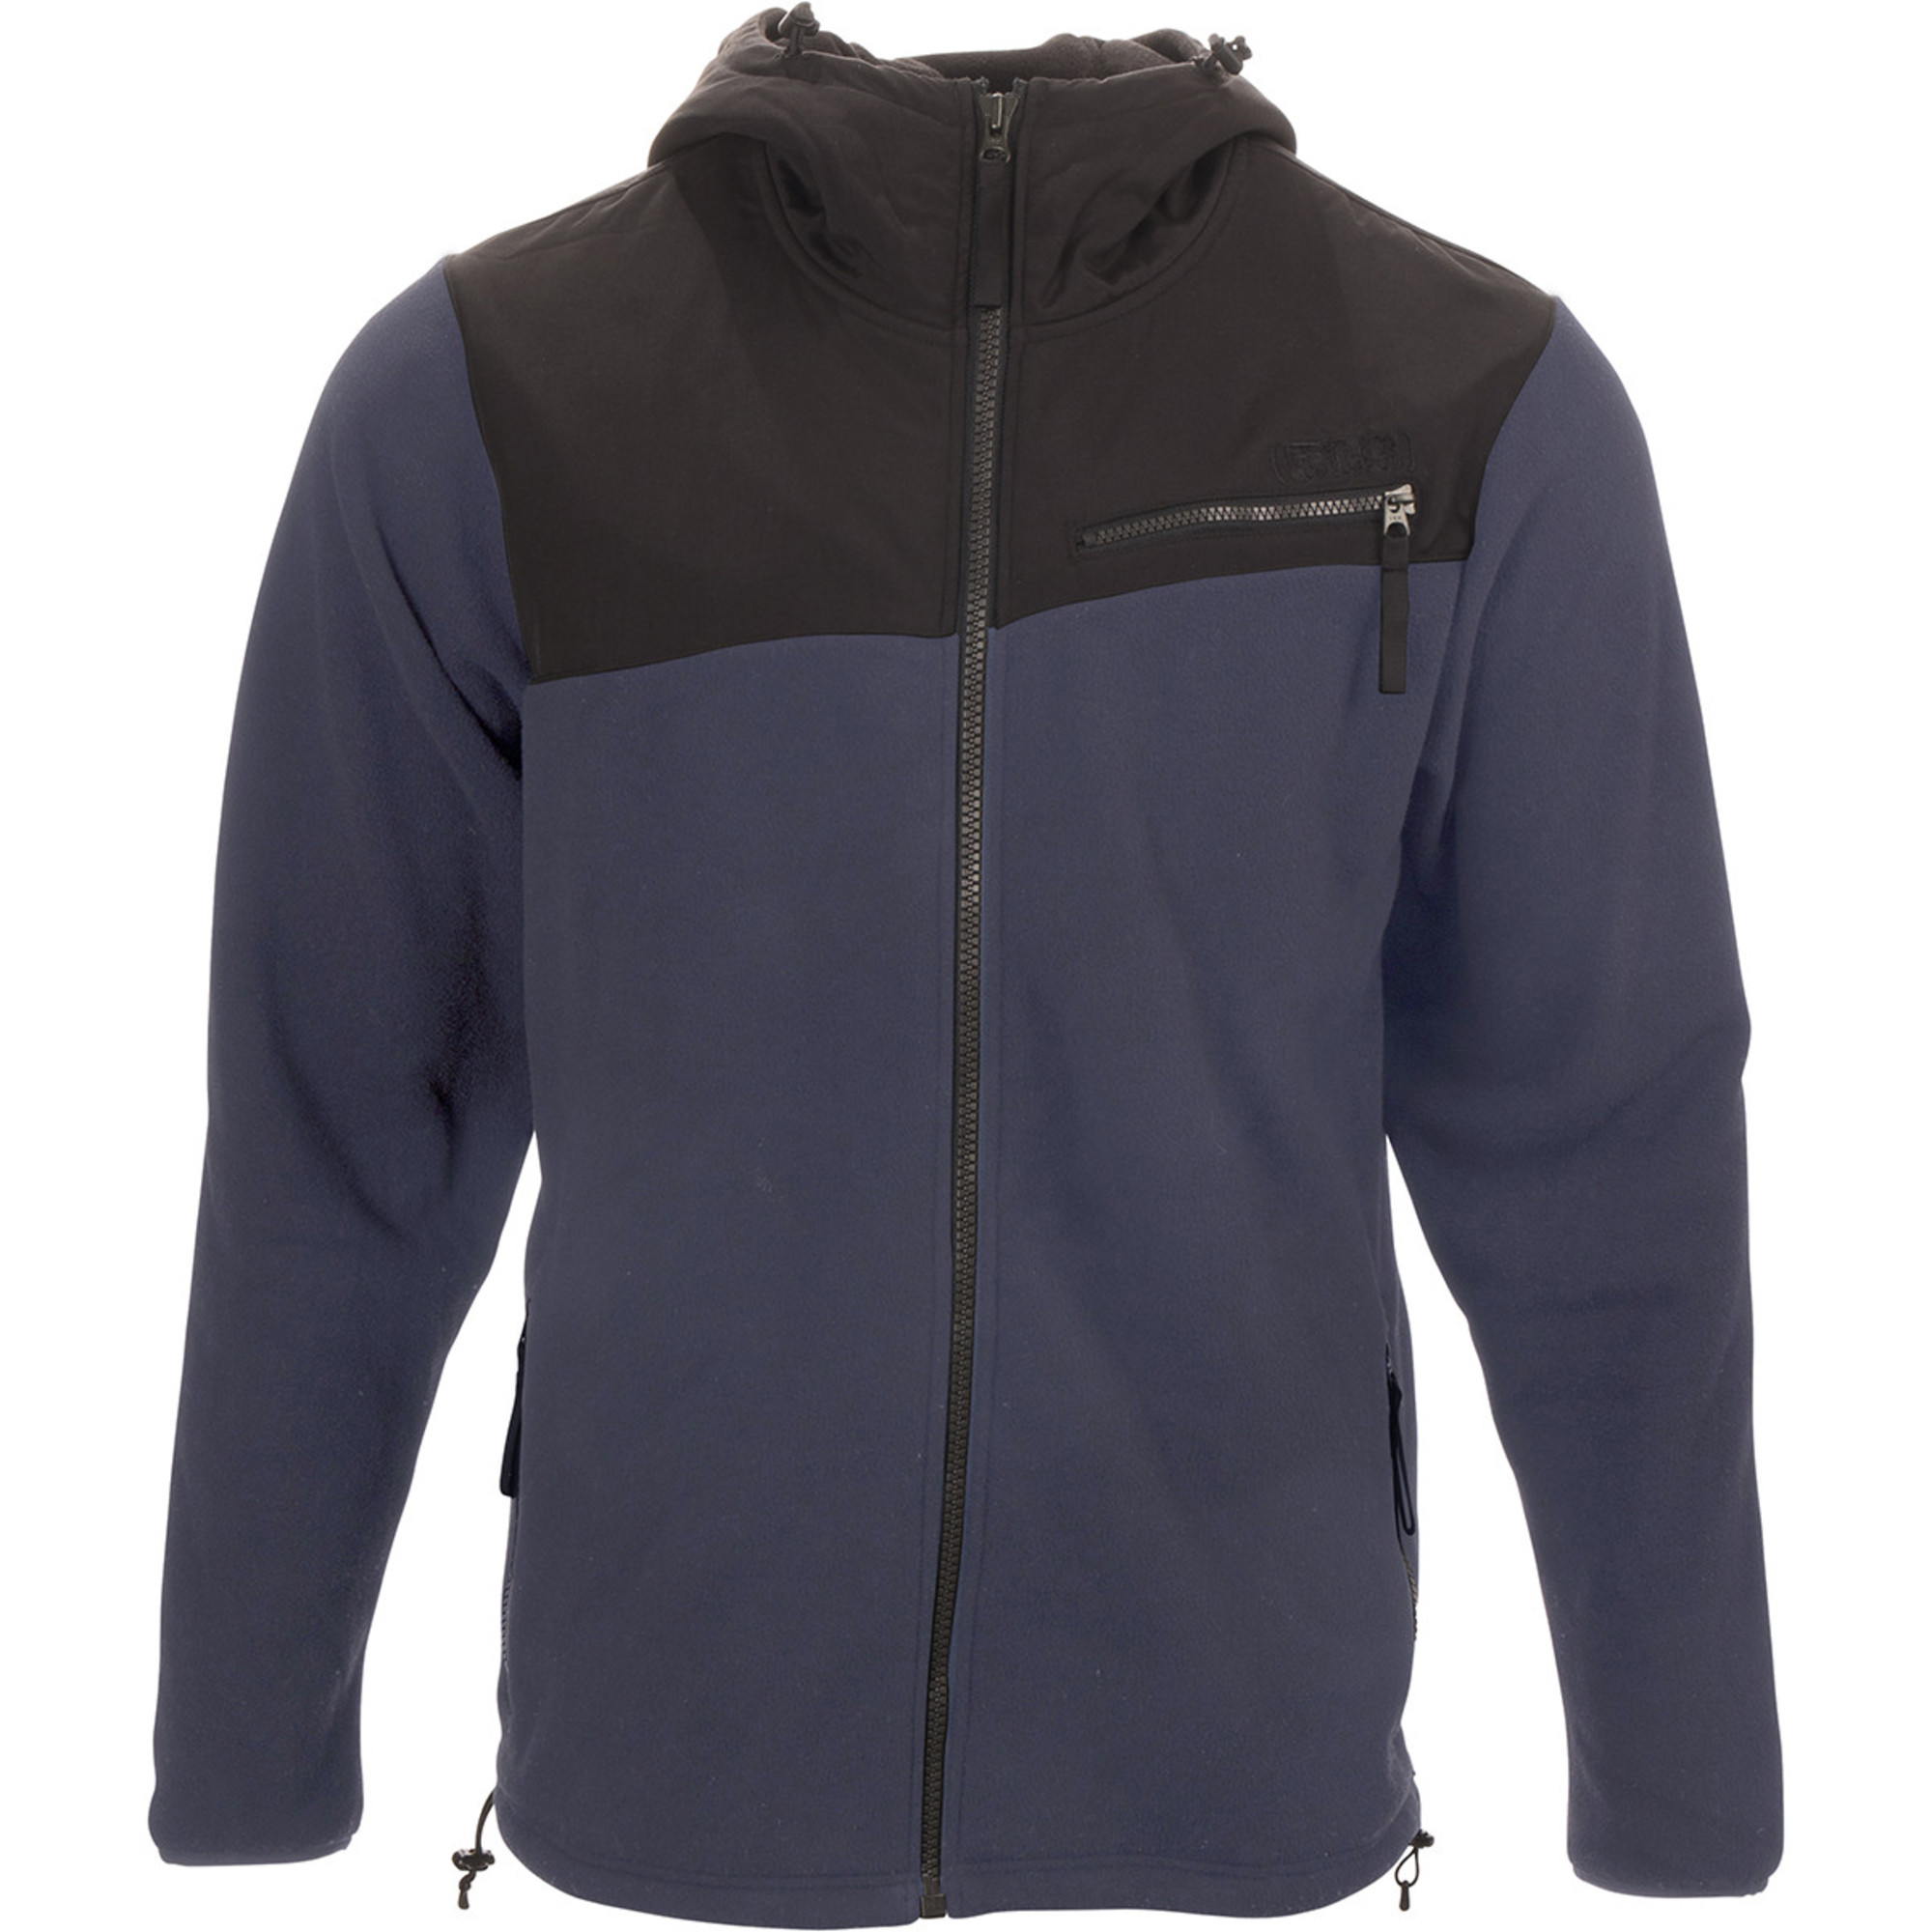  adult stroma expedition weight hoodie